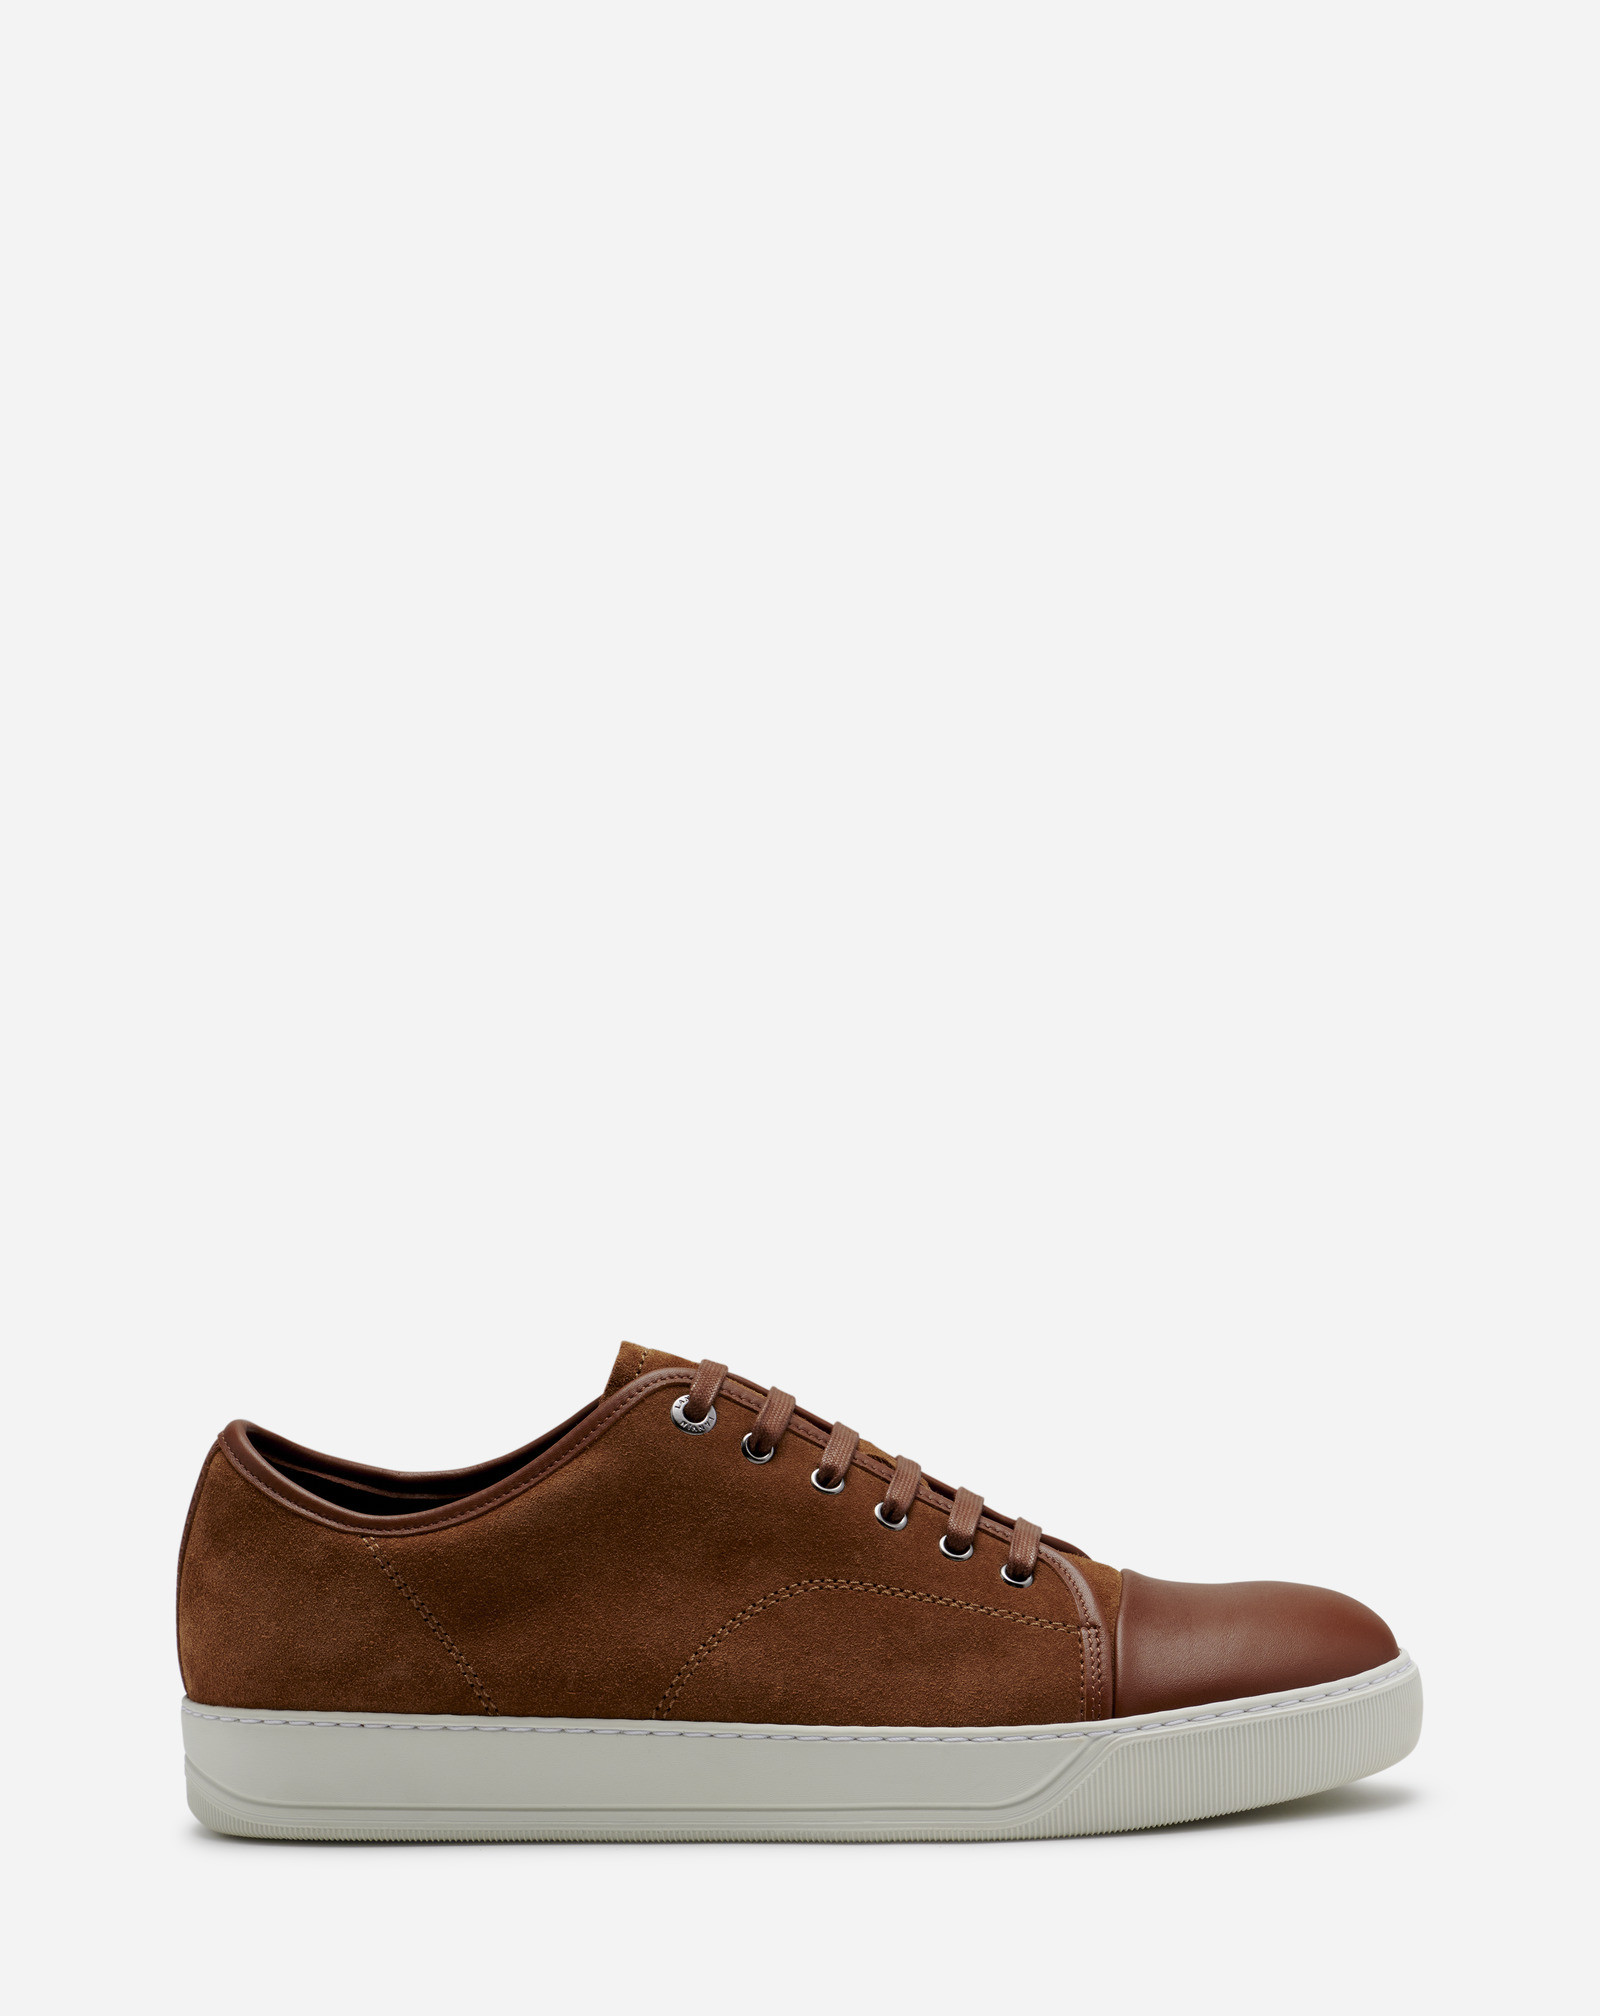 Dbb1 Leather Suede Sneakers Brown | Lanvin